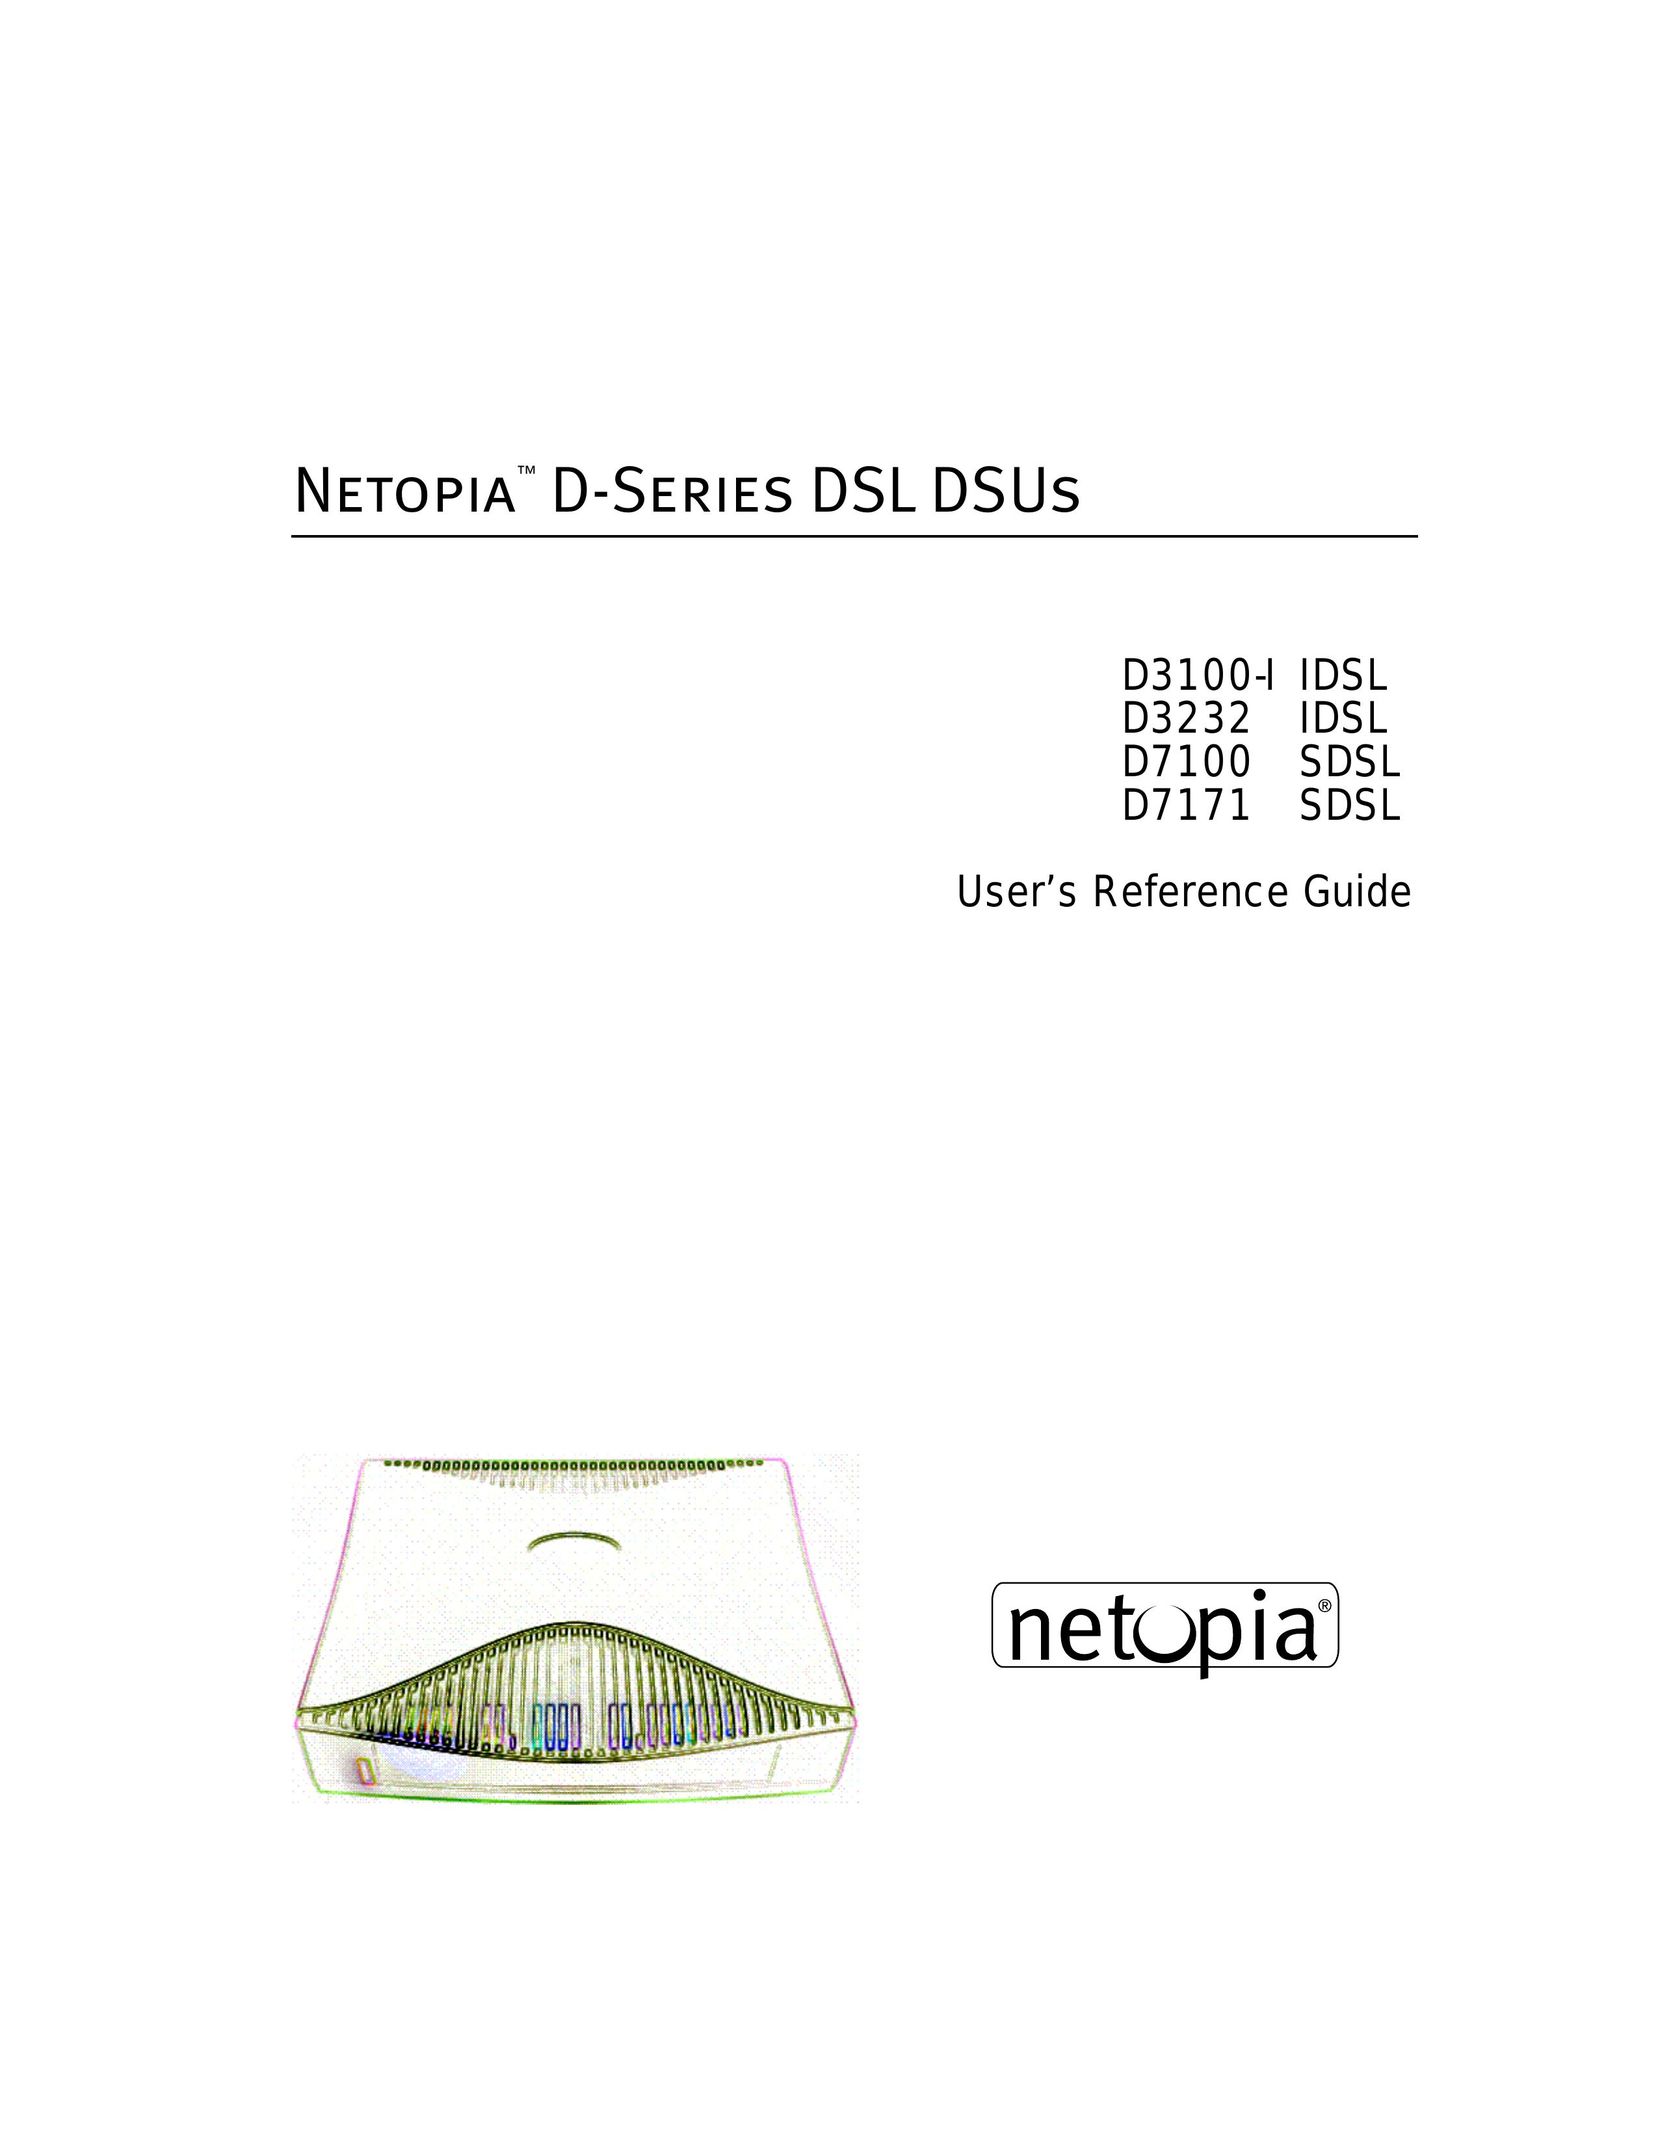 Netopia D3232 IDSL Network Router User Manual